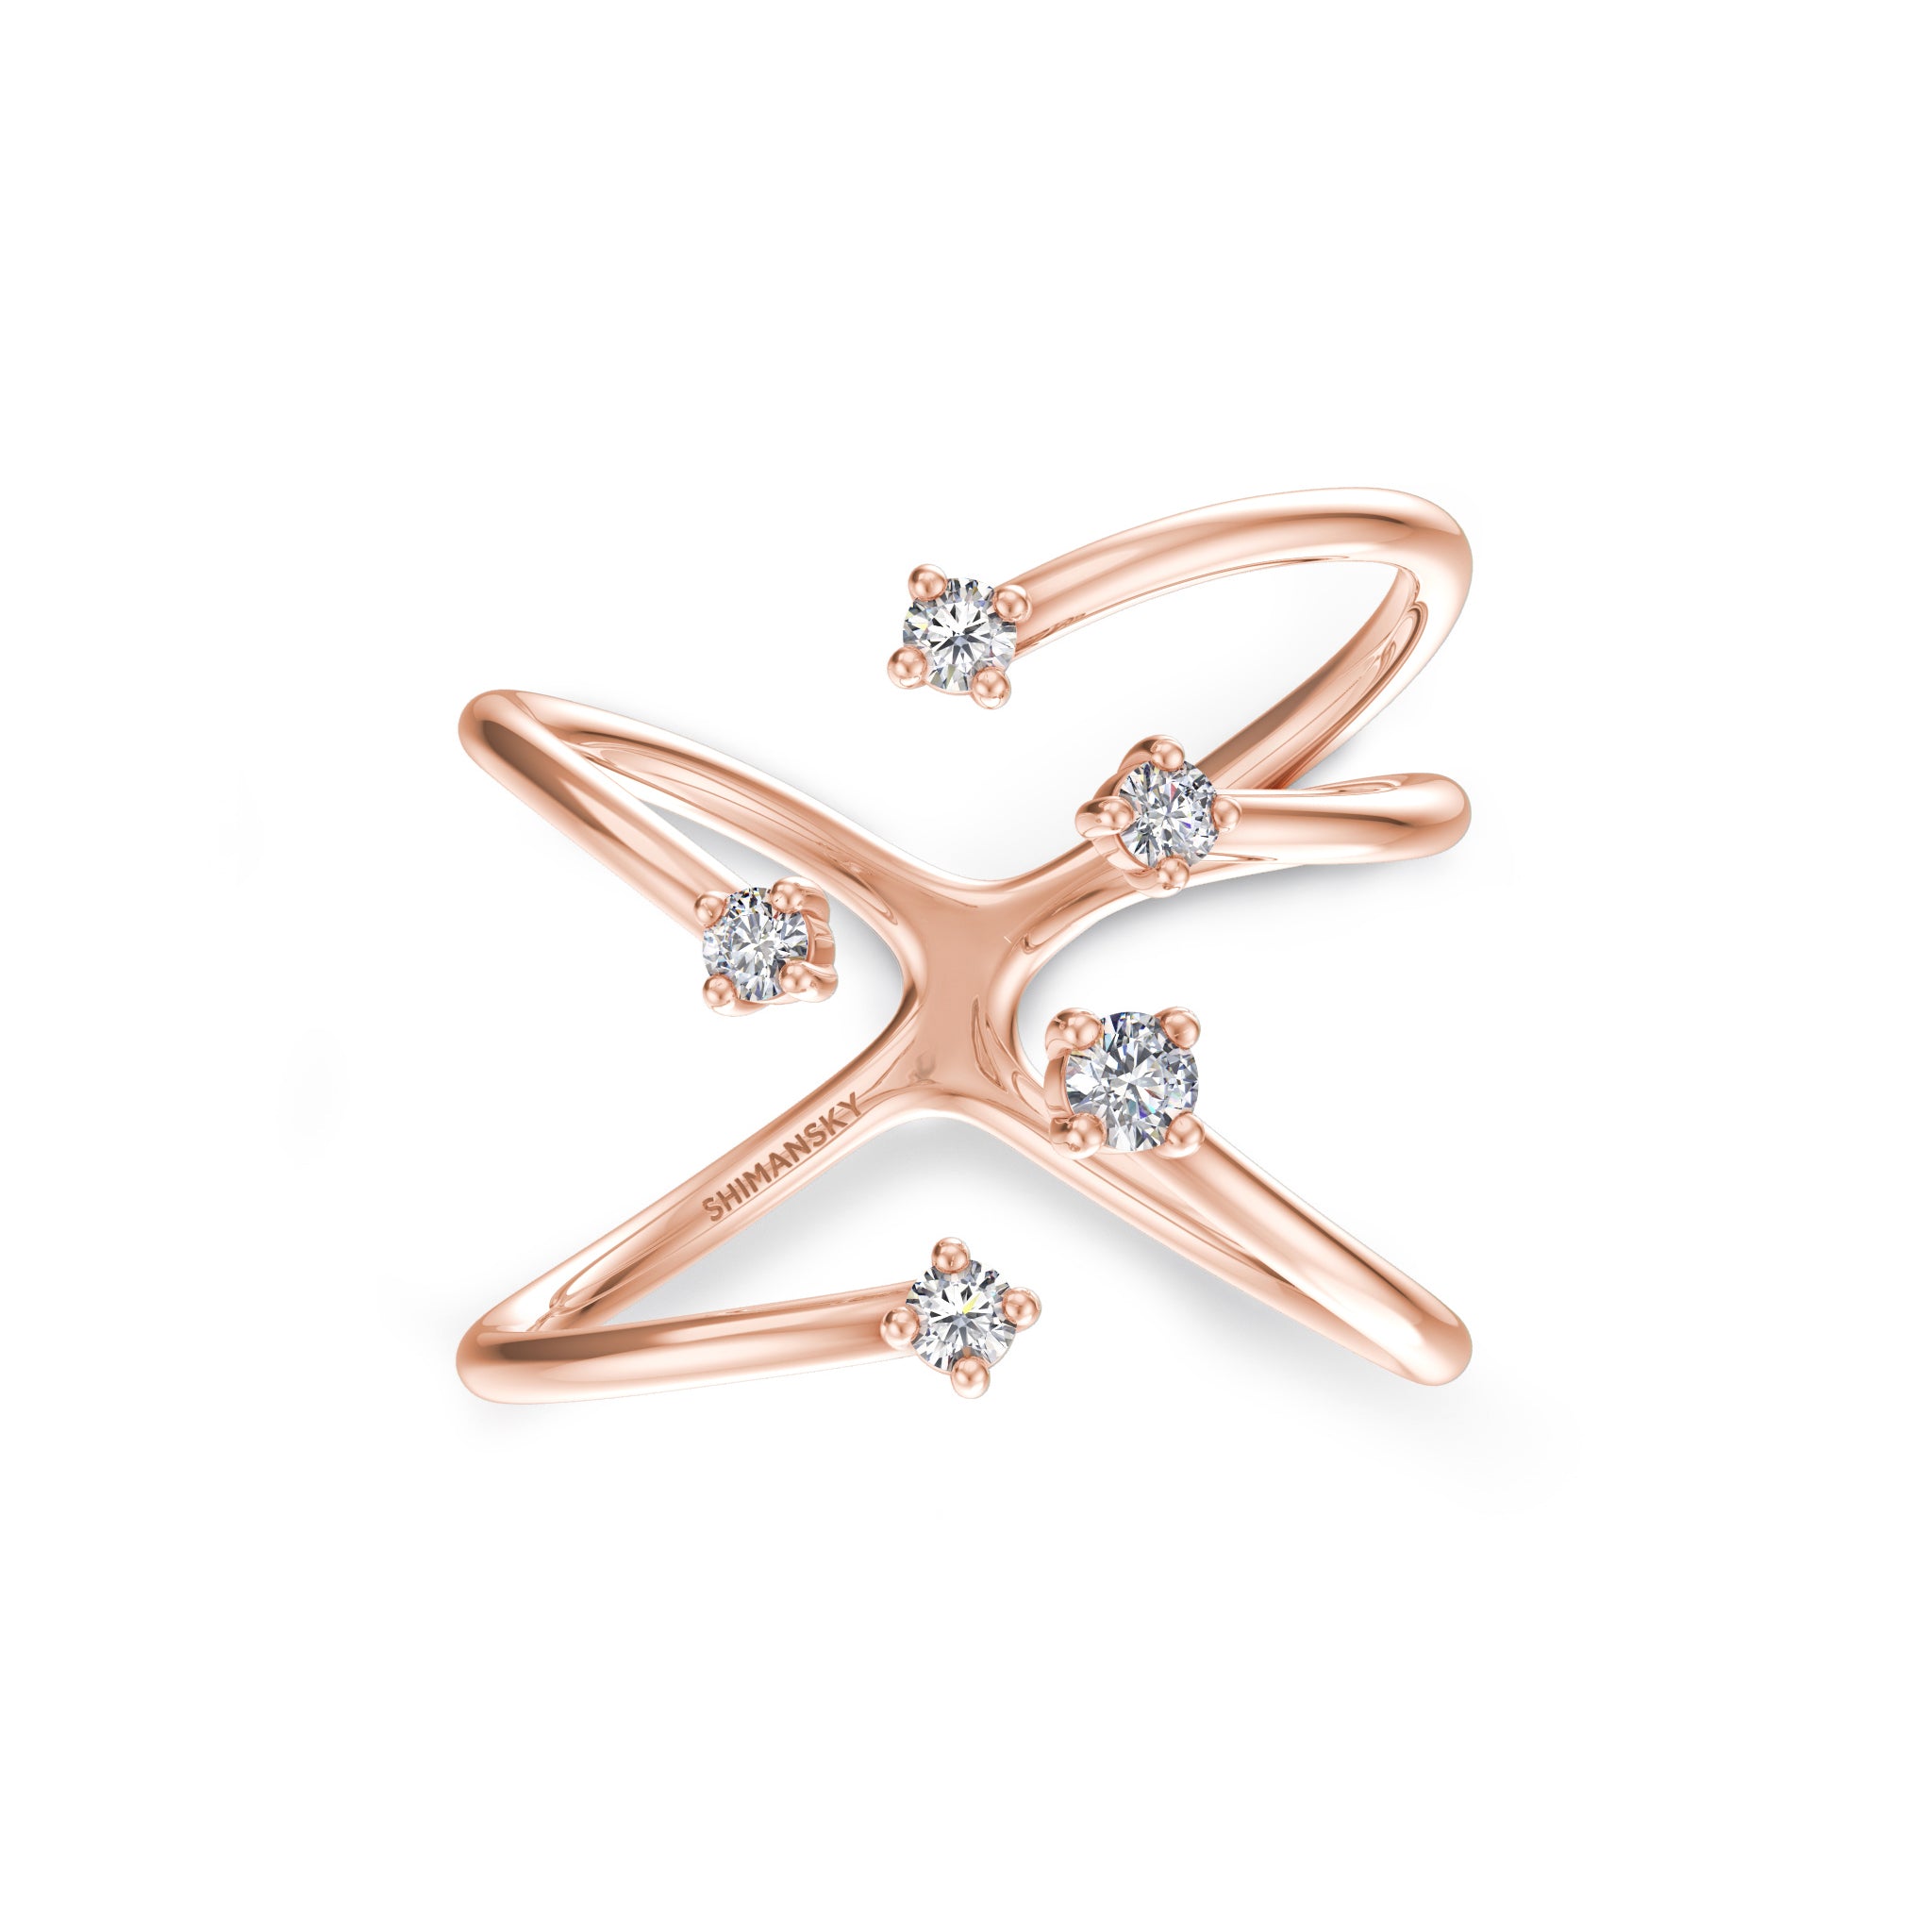 Shimansky - Southern Cross Small Diamond Ring Crafted in 14K Rose Gold